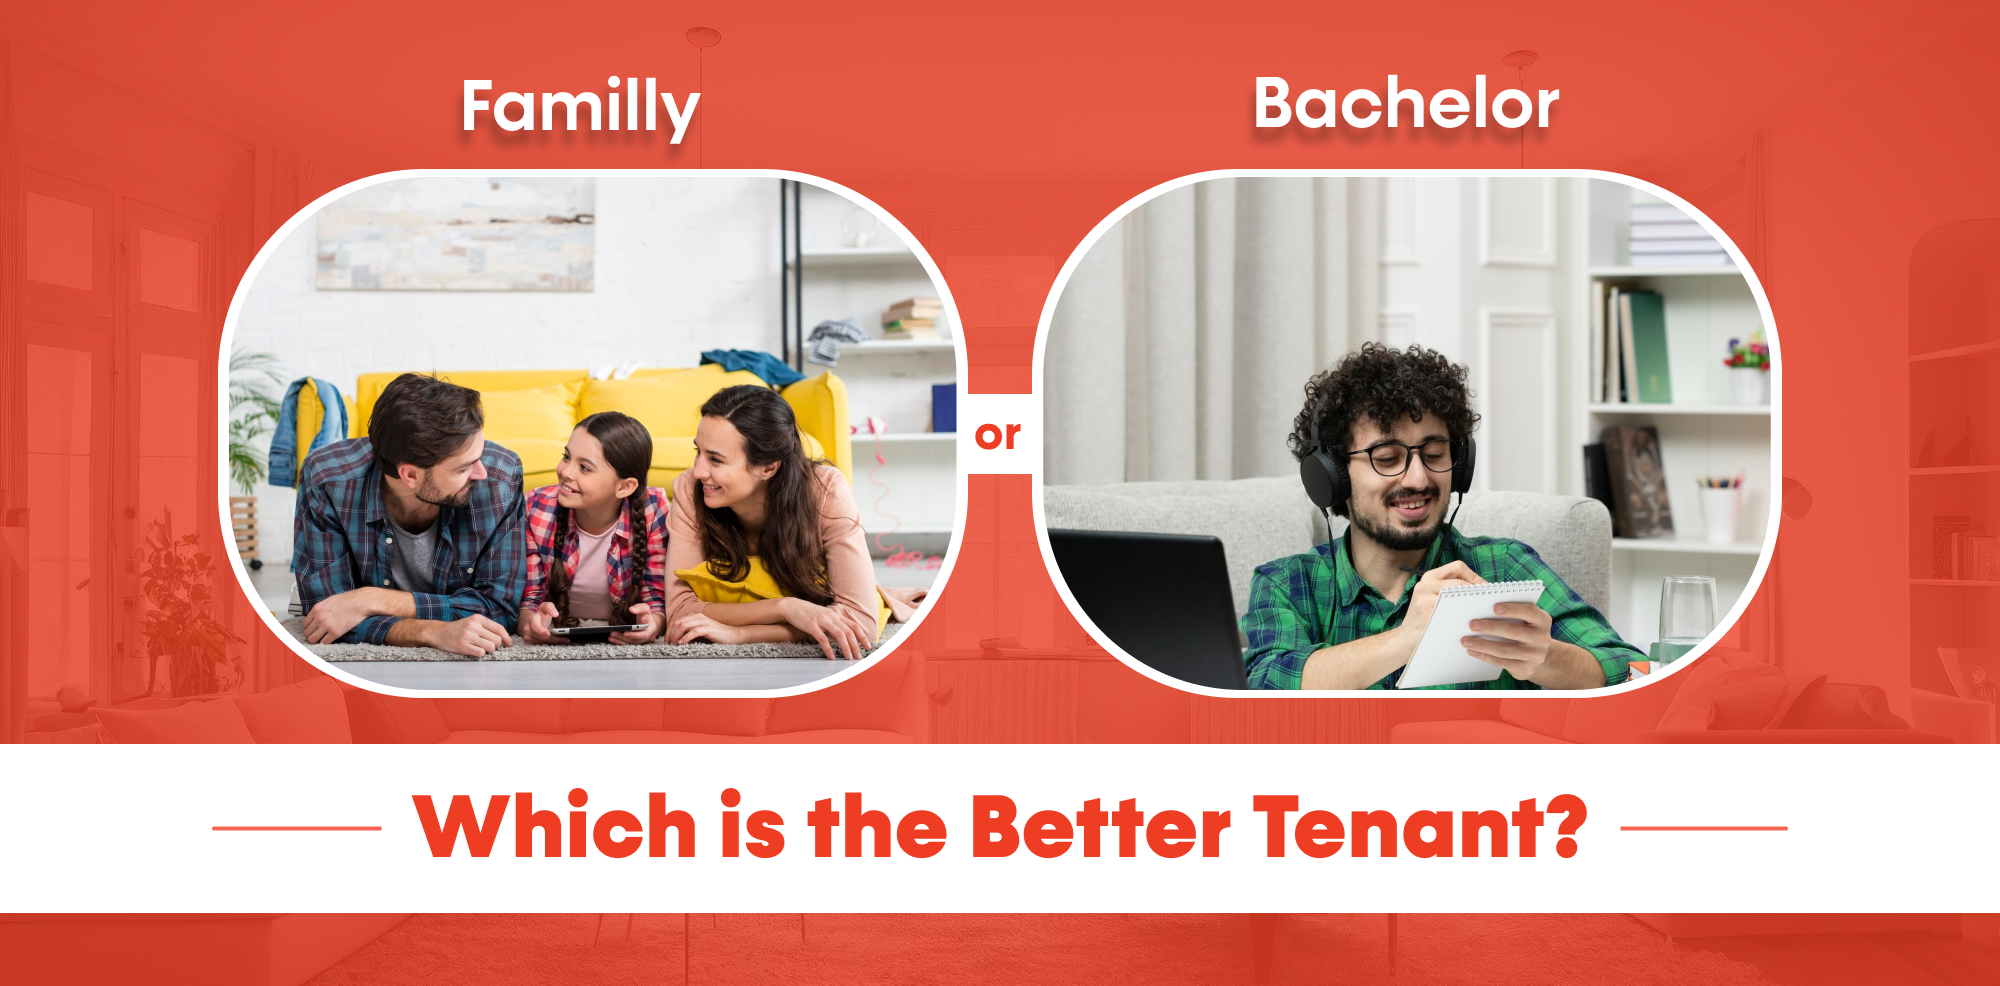 Family or Bachelor: Which is the Better Tenant?